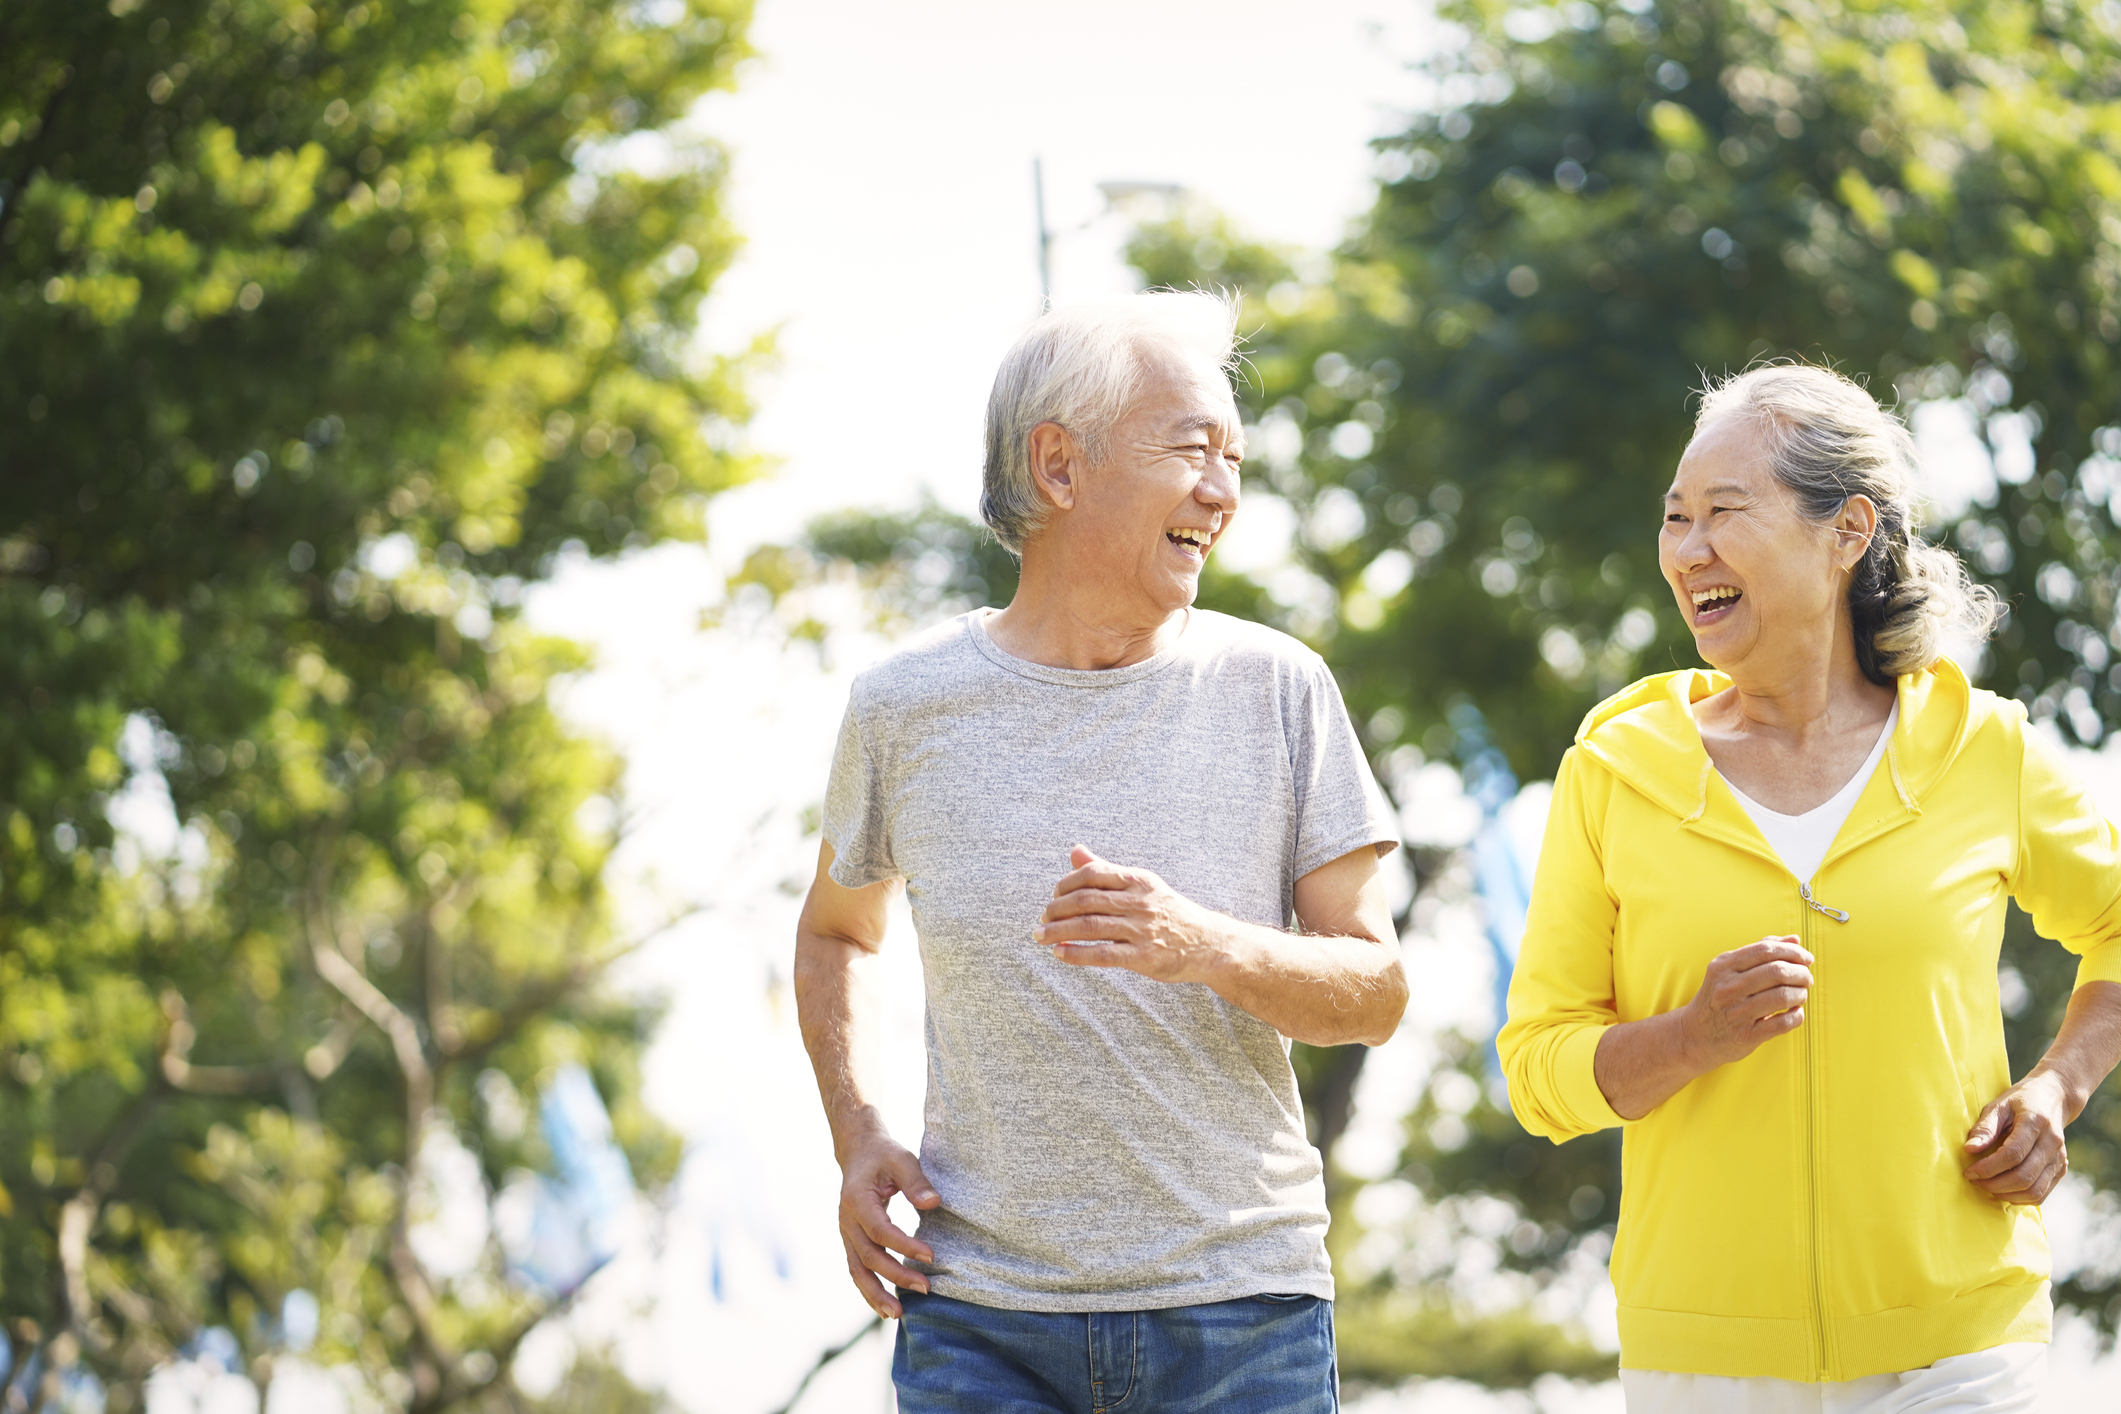 4 Key Benefits of Exercise for Older Adults